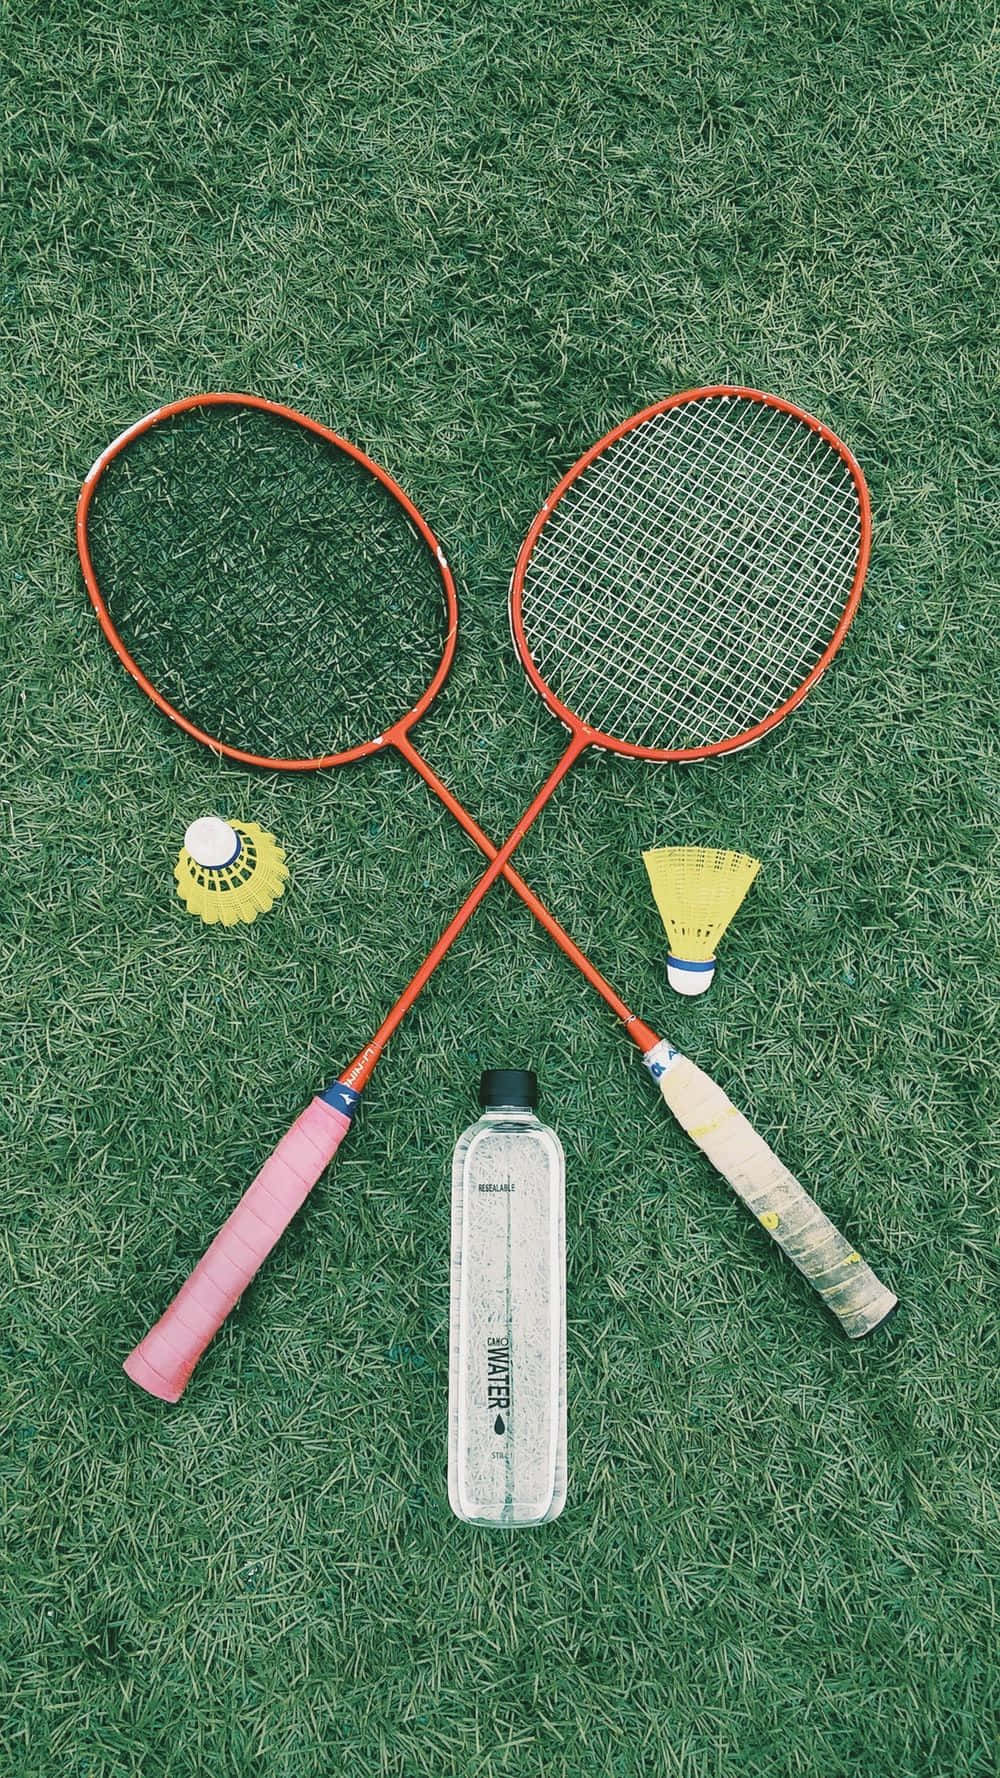 Badminton Rackets And Bottle On Grass